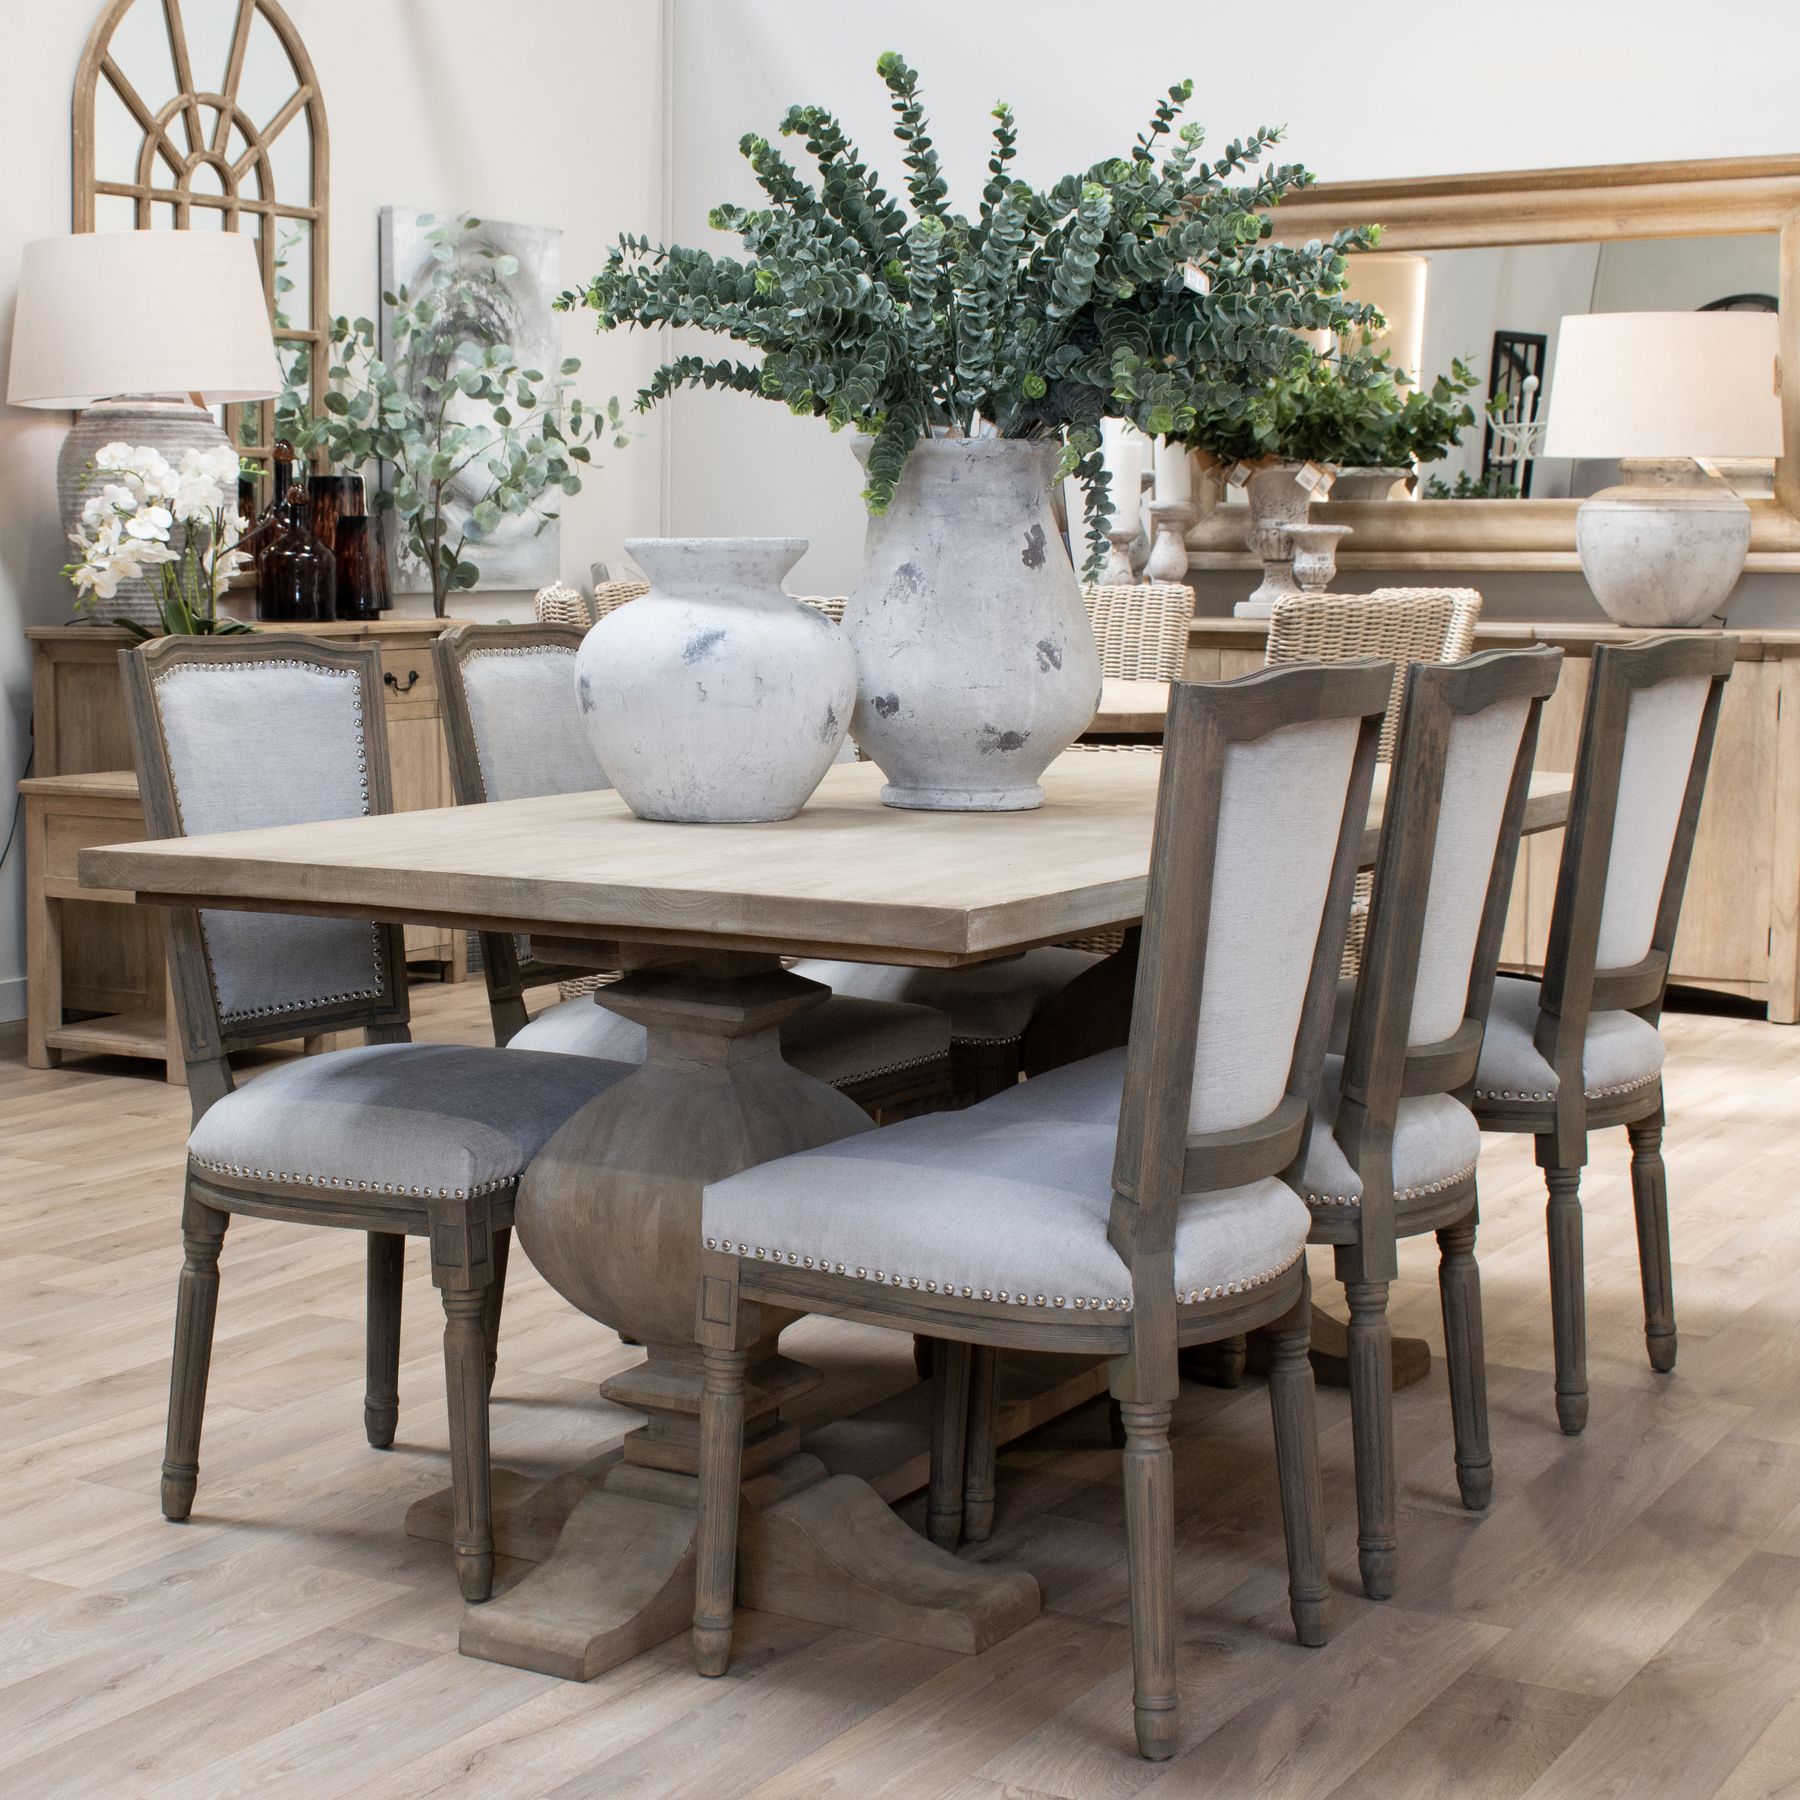 Copgrove Collection Large Dining Table - Image 4